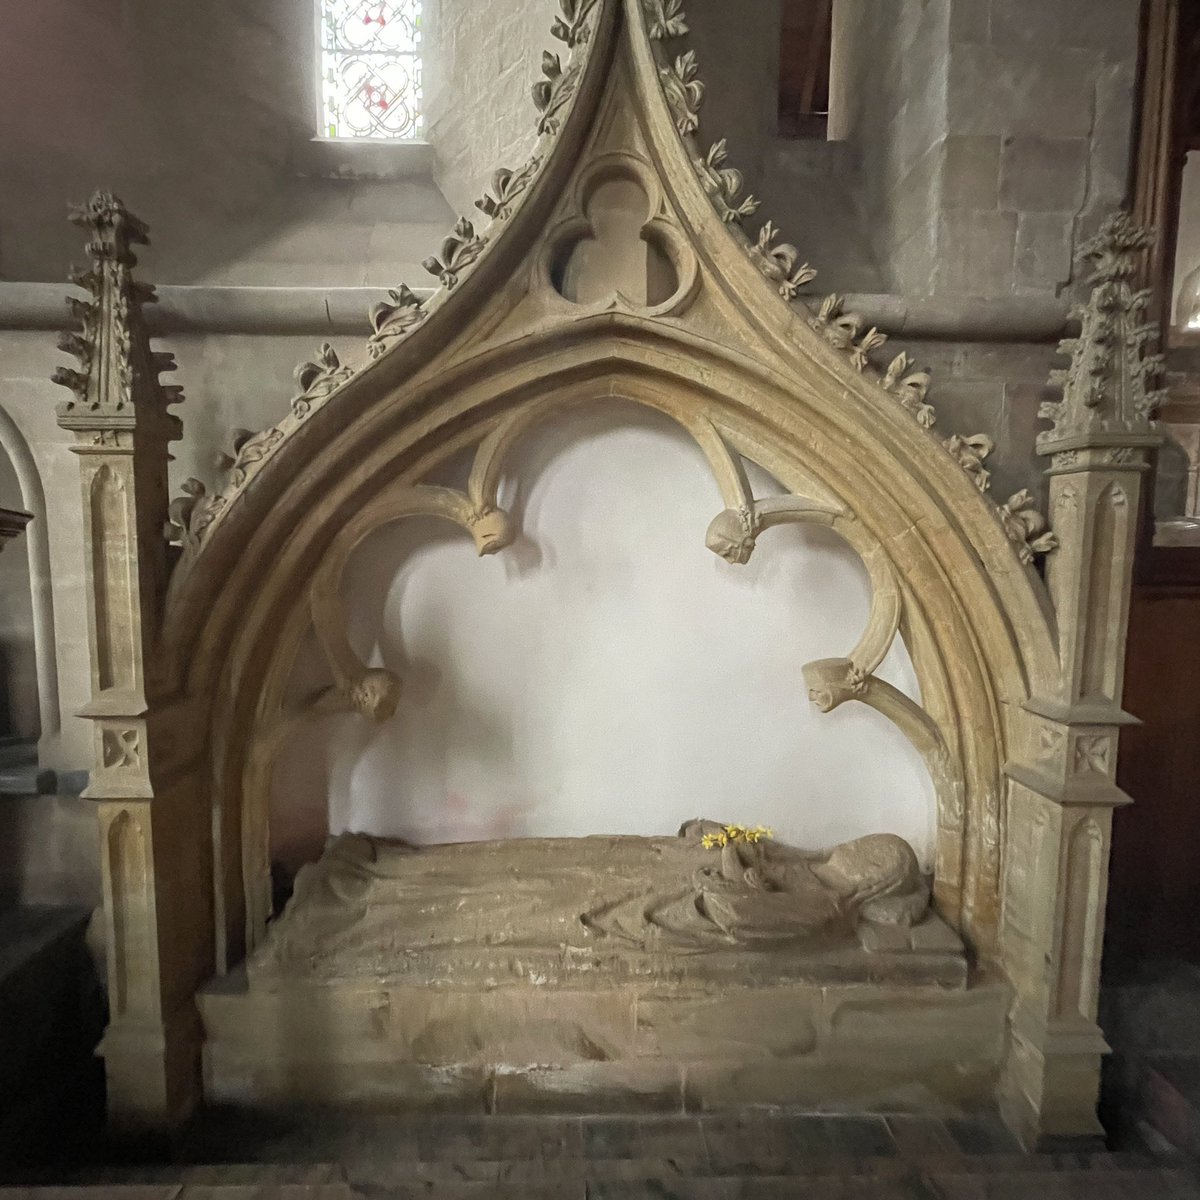 We don’t know for certain who she is, possibly one of the Everard family, but someone had put a spray of flowers into her hands when I visited St George’s, Dunster, Somerset a couple of weeks ago stone female, effigy with canopy #MonumentsMonday